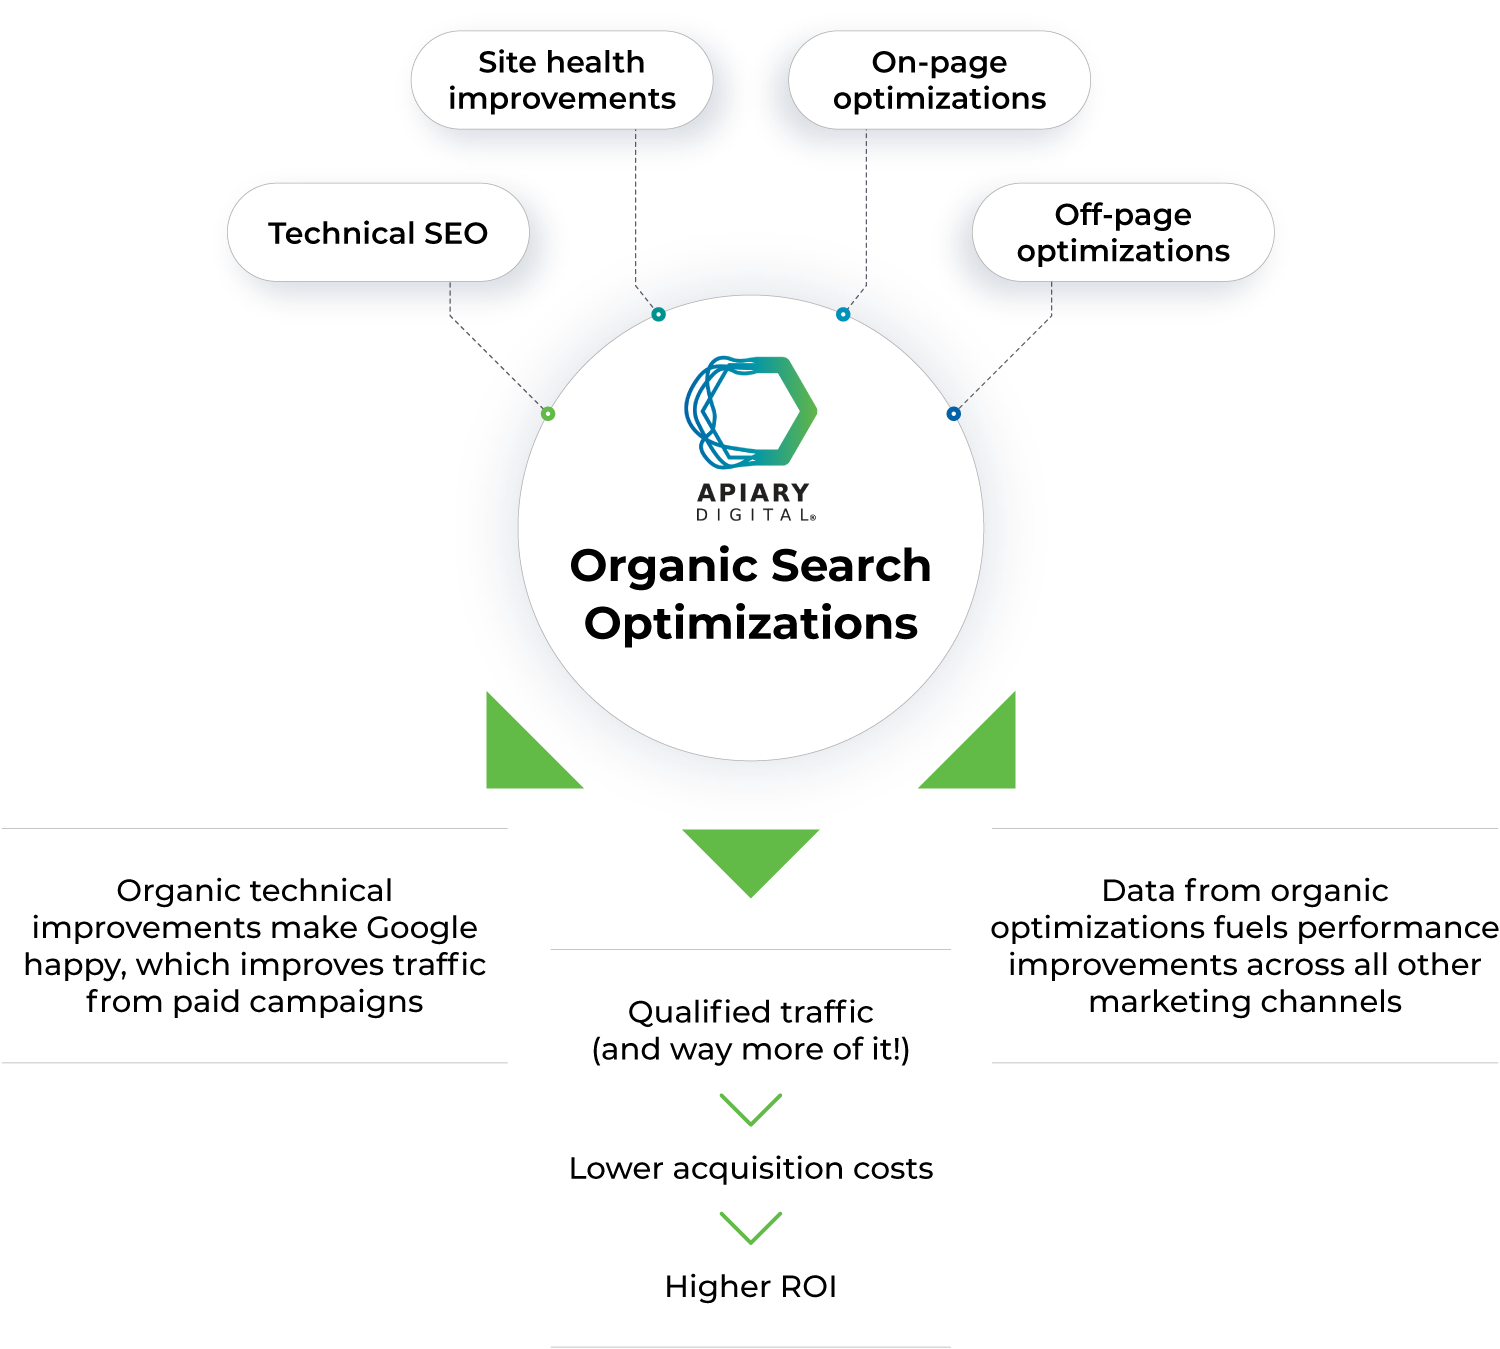 Types of organic search engine optimization services and their impact on digital performance and revenue.